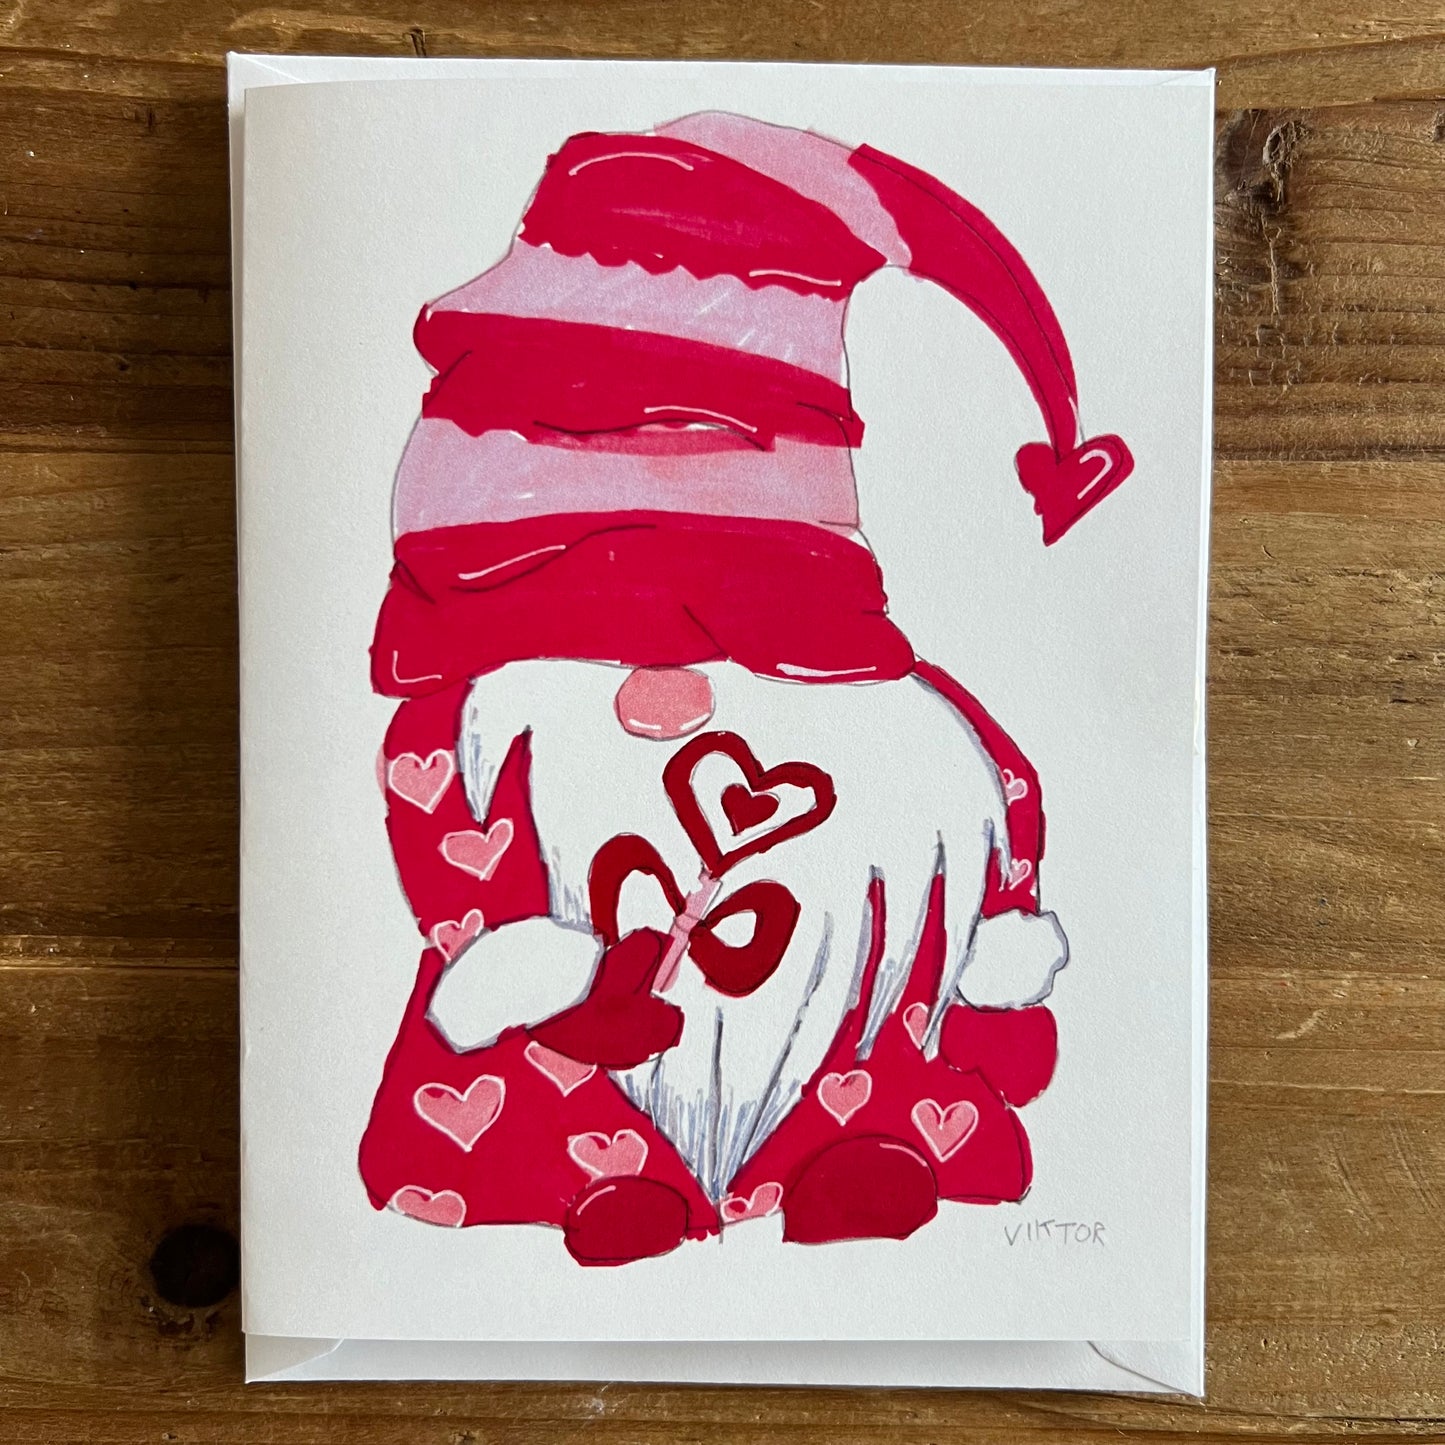 Share your Love with the Gnomes - Greeting cards in size 6.5x10” with mat finish